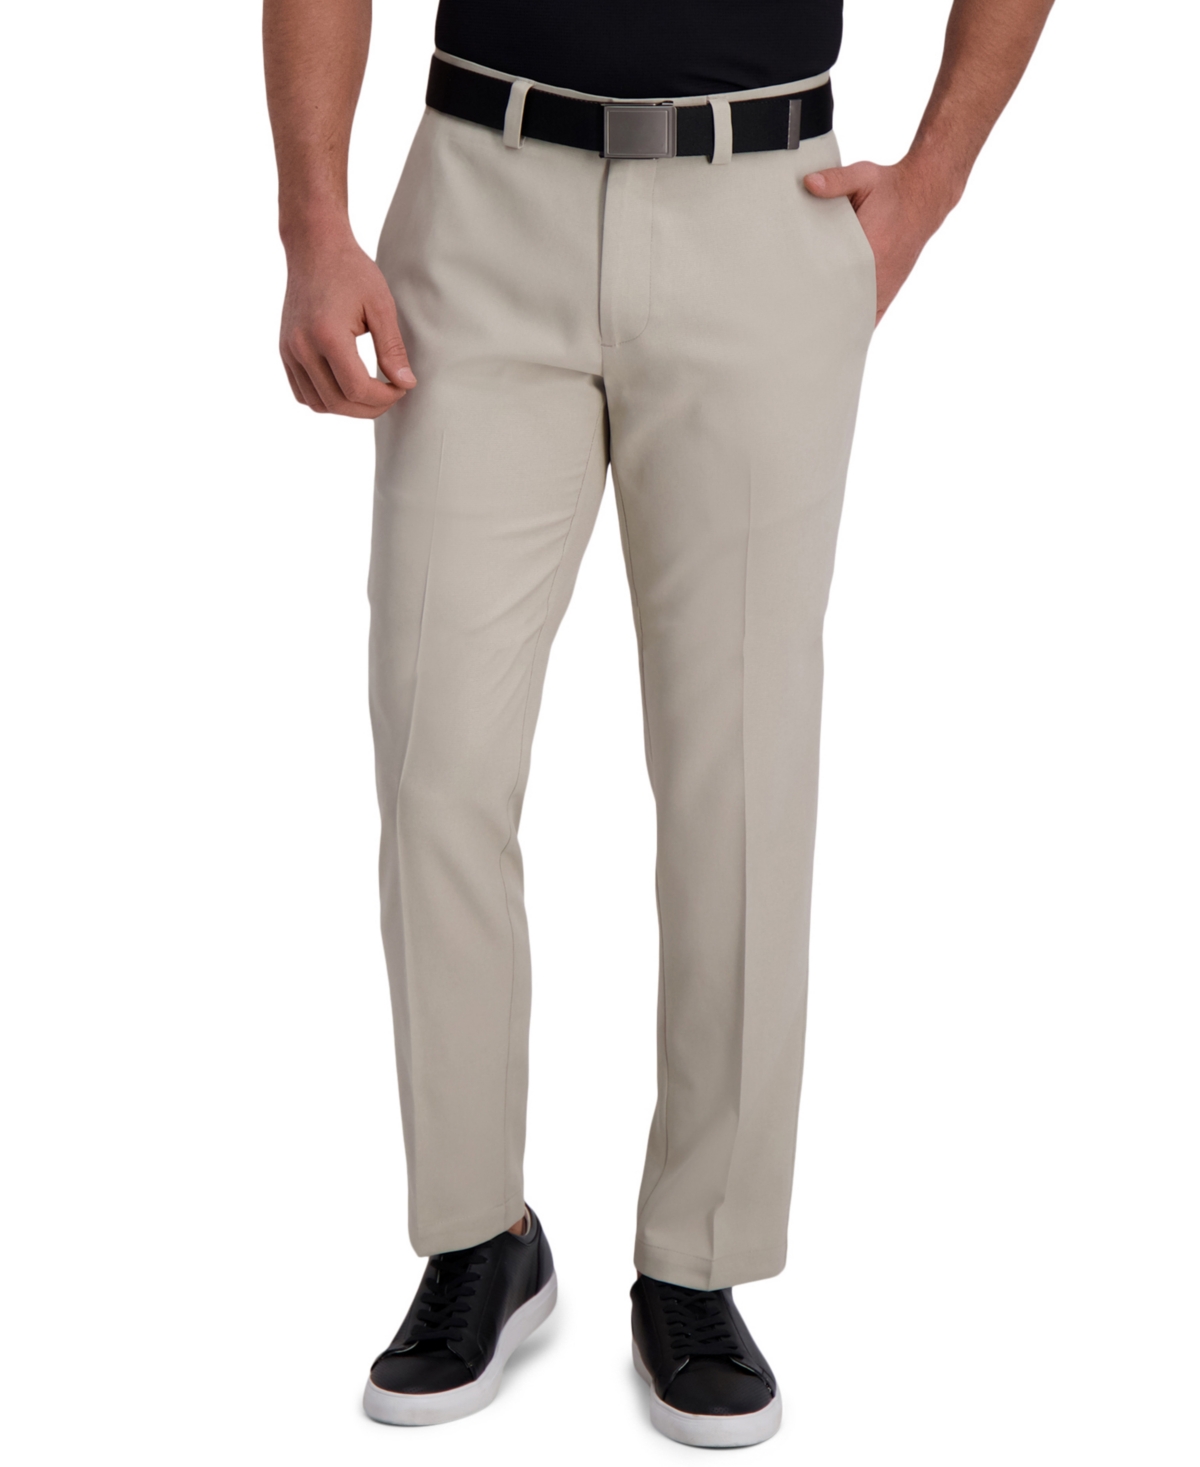 Cool Right Performance Flex Straight Fit Flat Front Pant - String